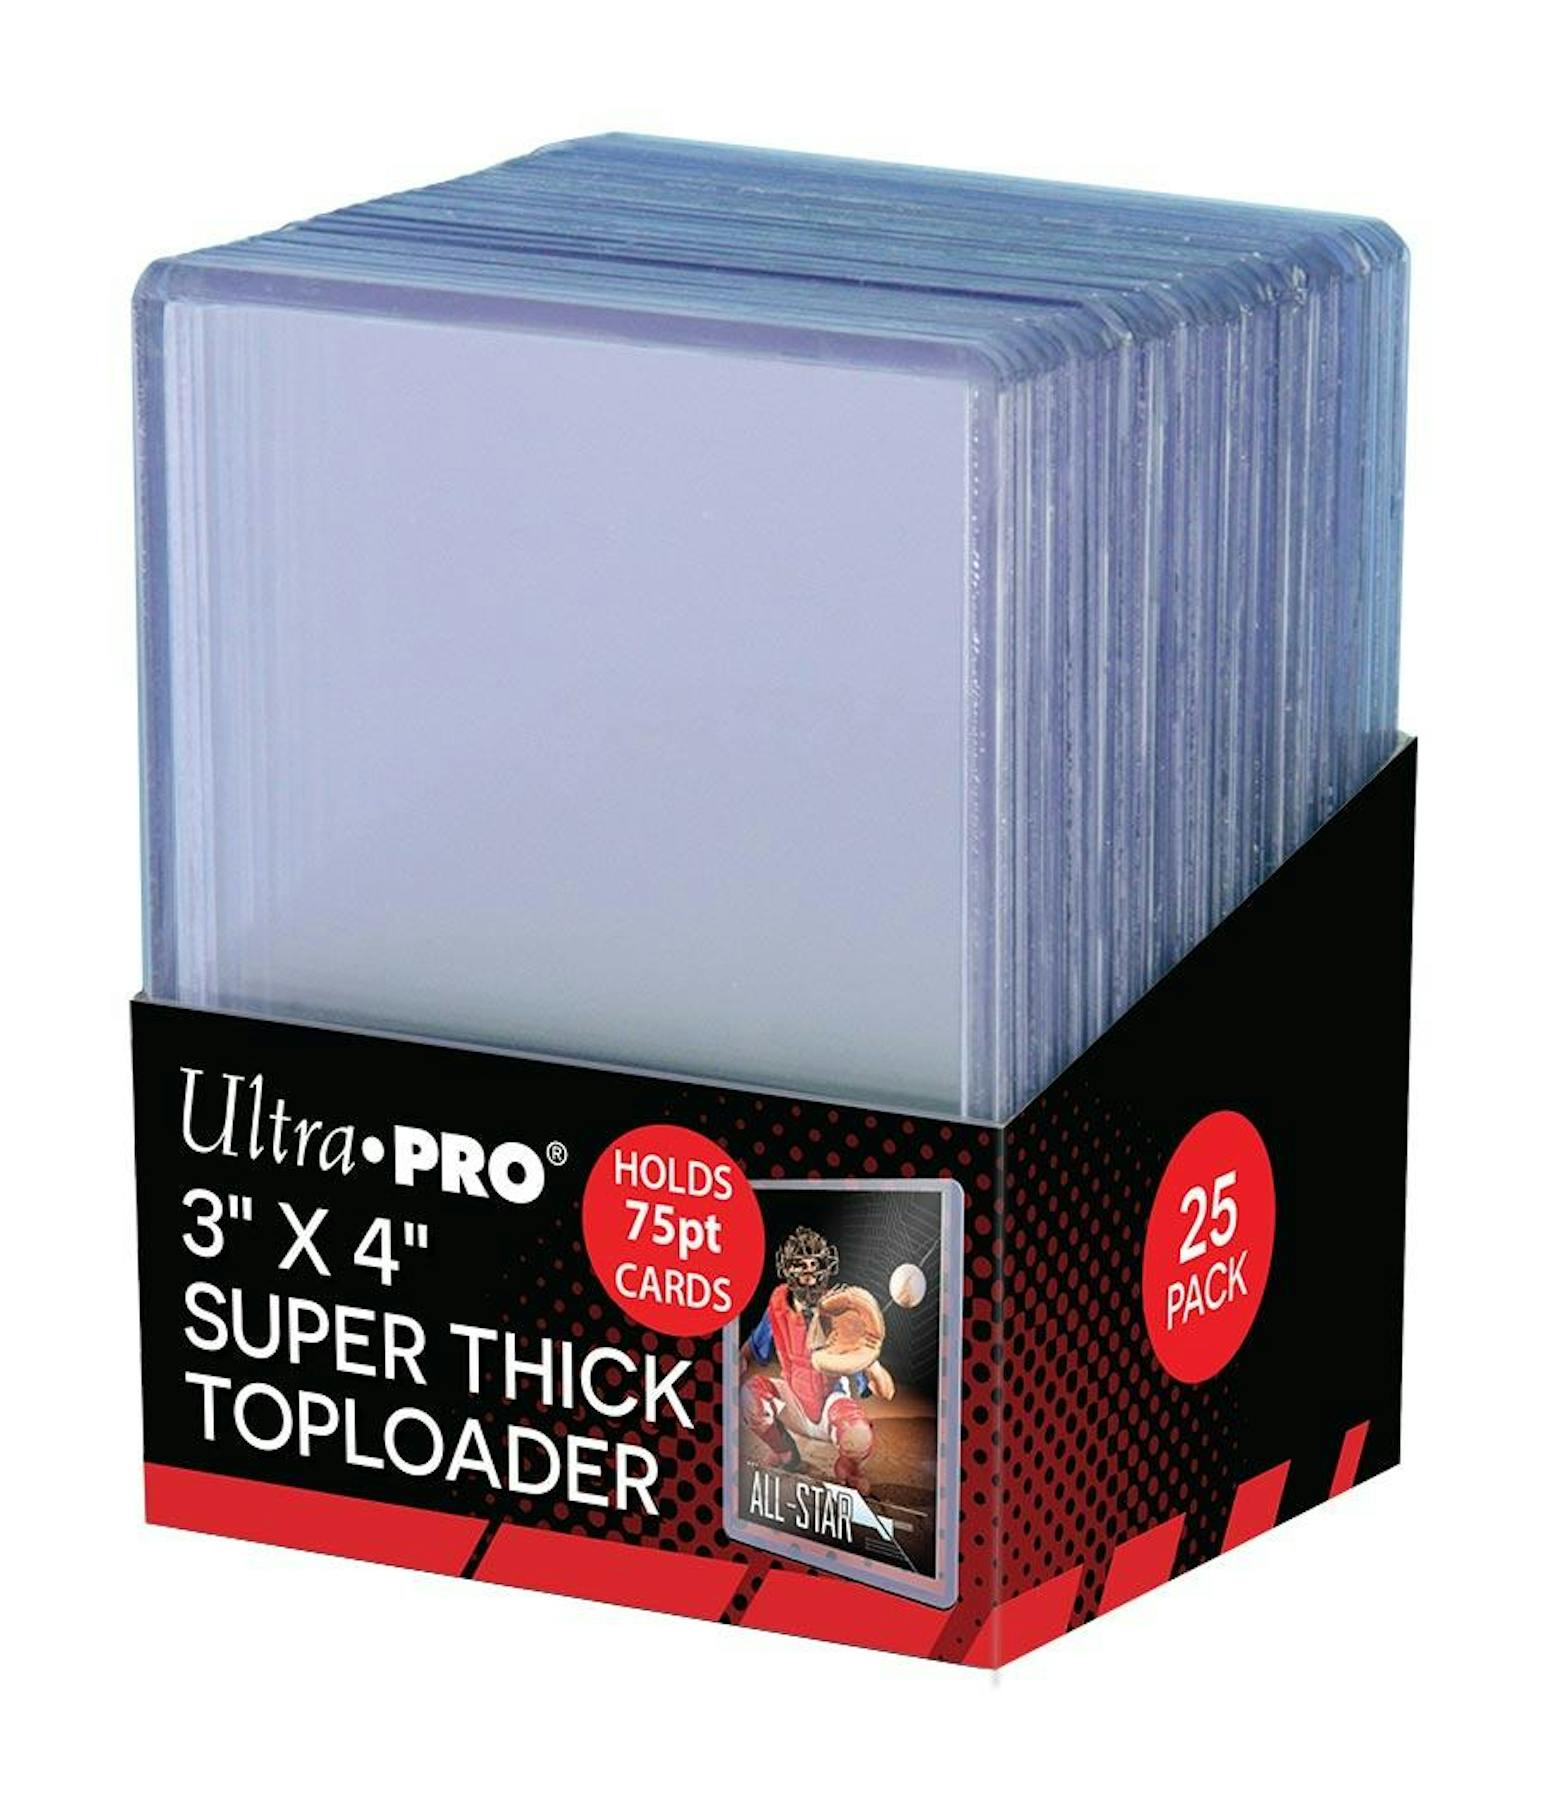 Ultra Pro 3x4 Super Thick 75pt. Toploaders (25 Count Pack